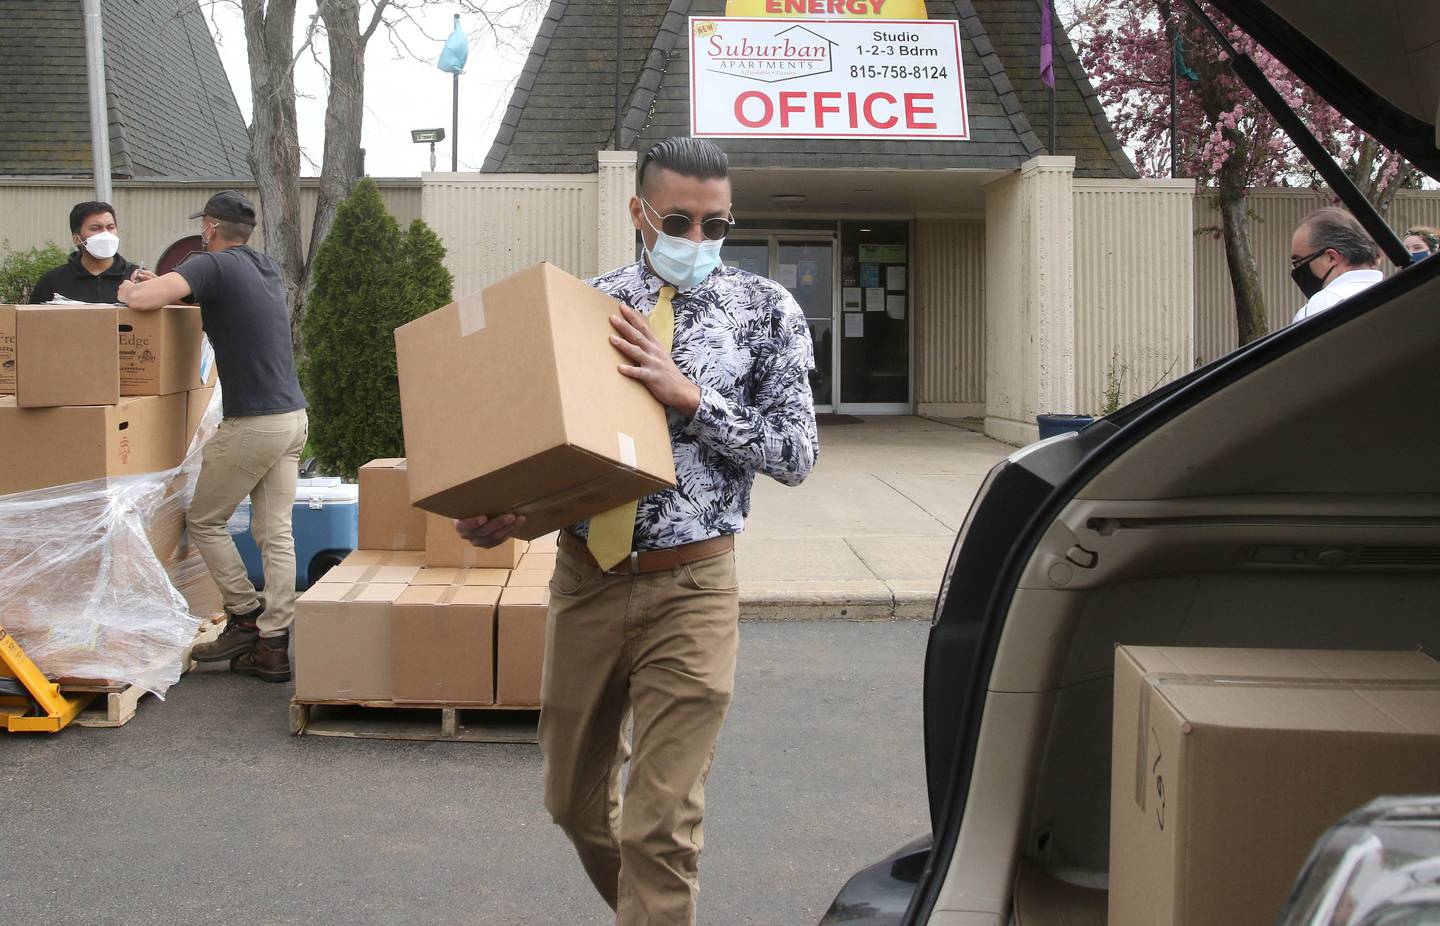 Amit Sharma, with Suburban Apartments, carries a box of food to a car at the complex in DeKalb Wednesday during a food distribution by DeKalb County Community Gardens.